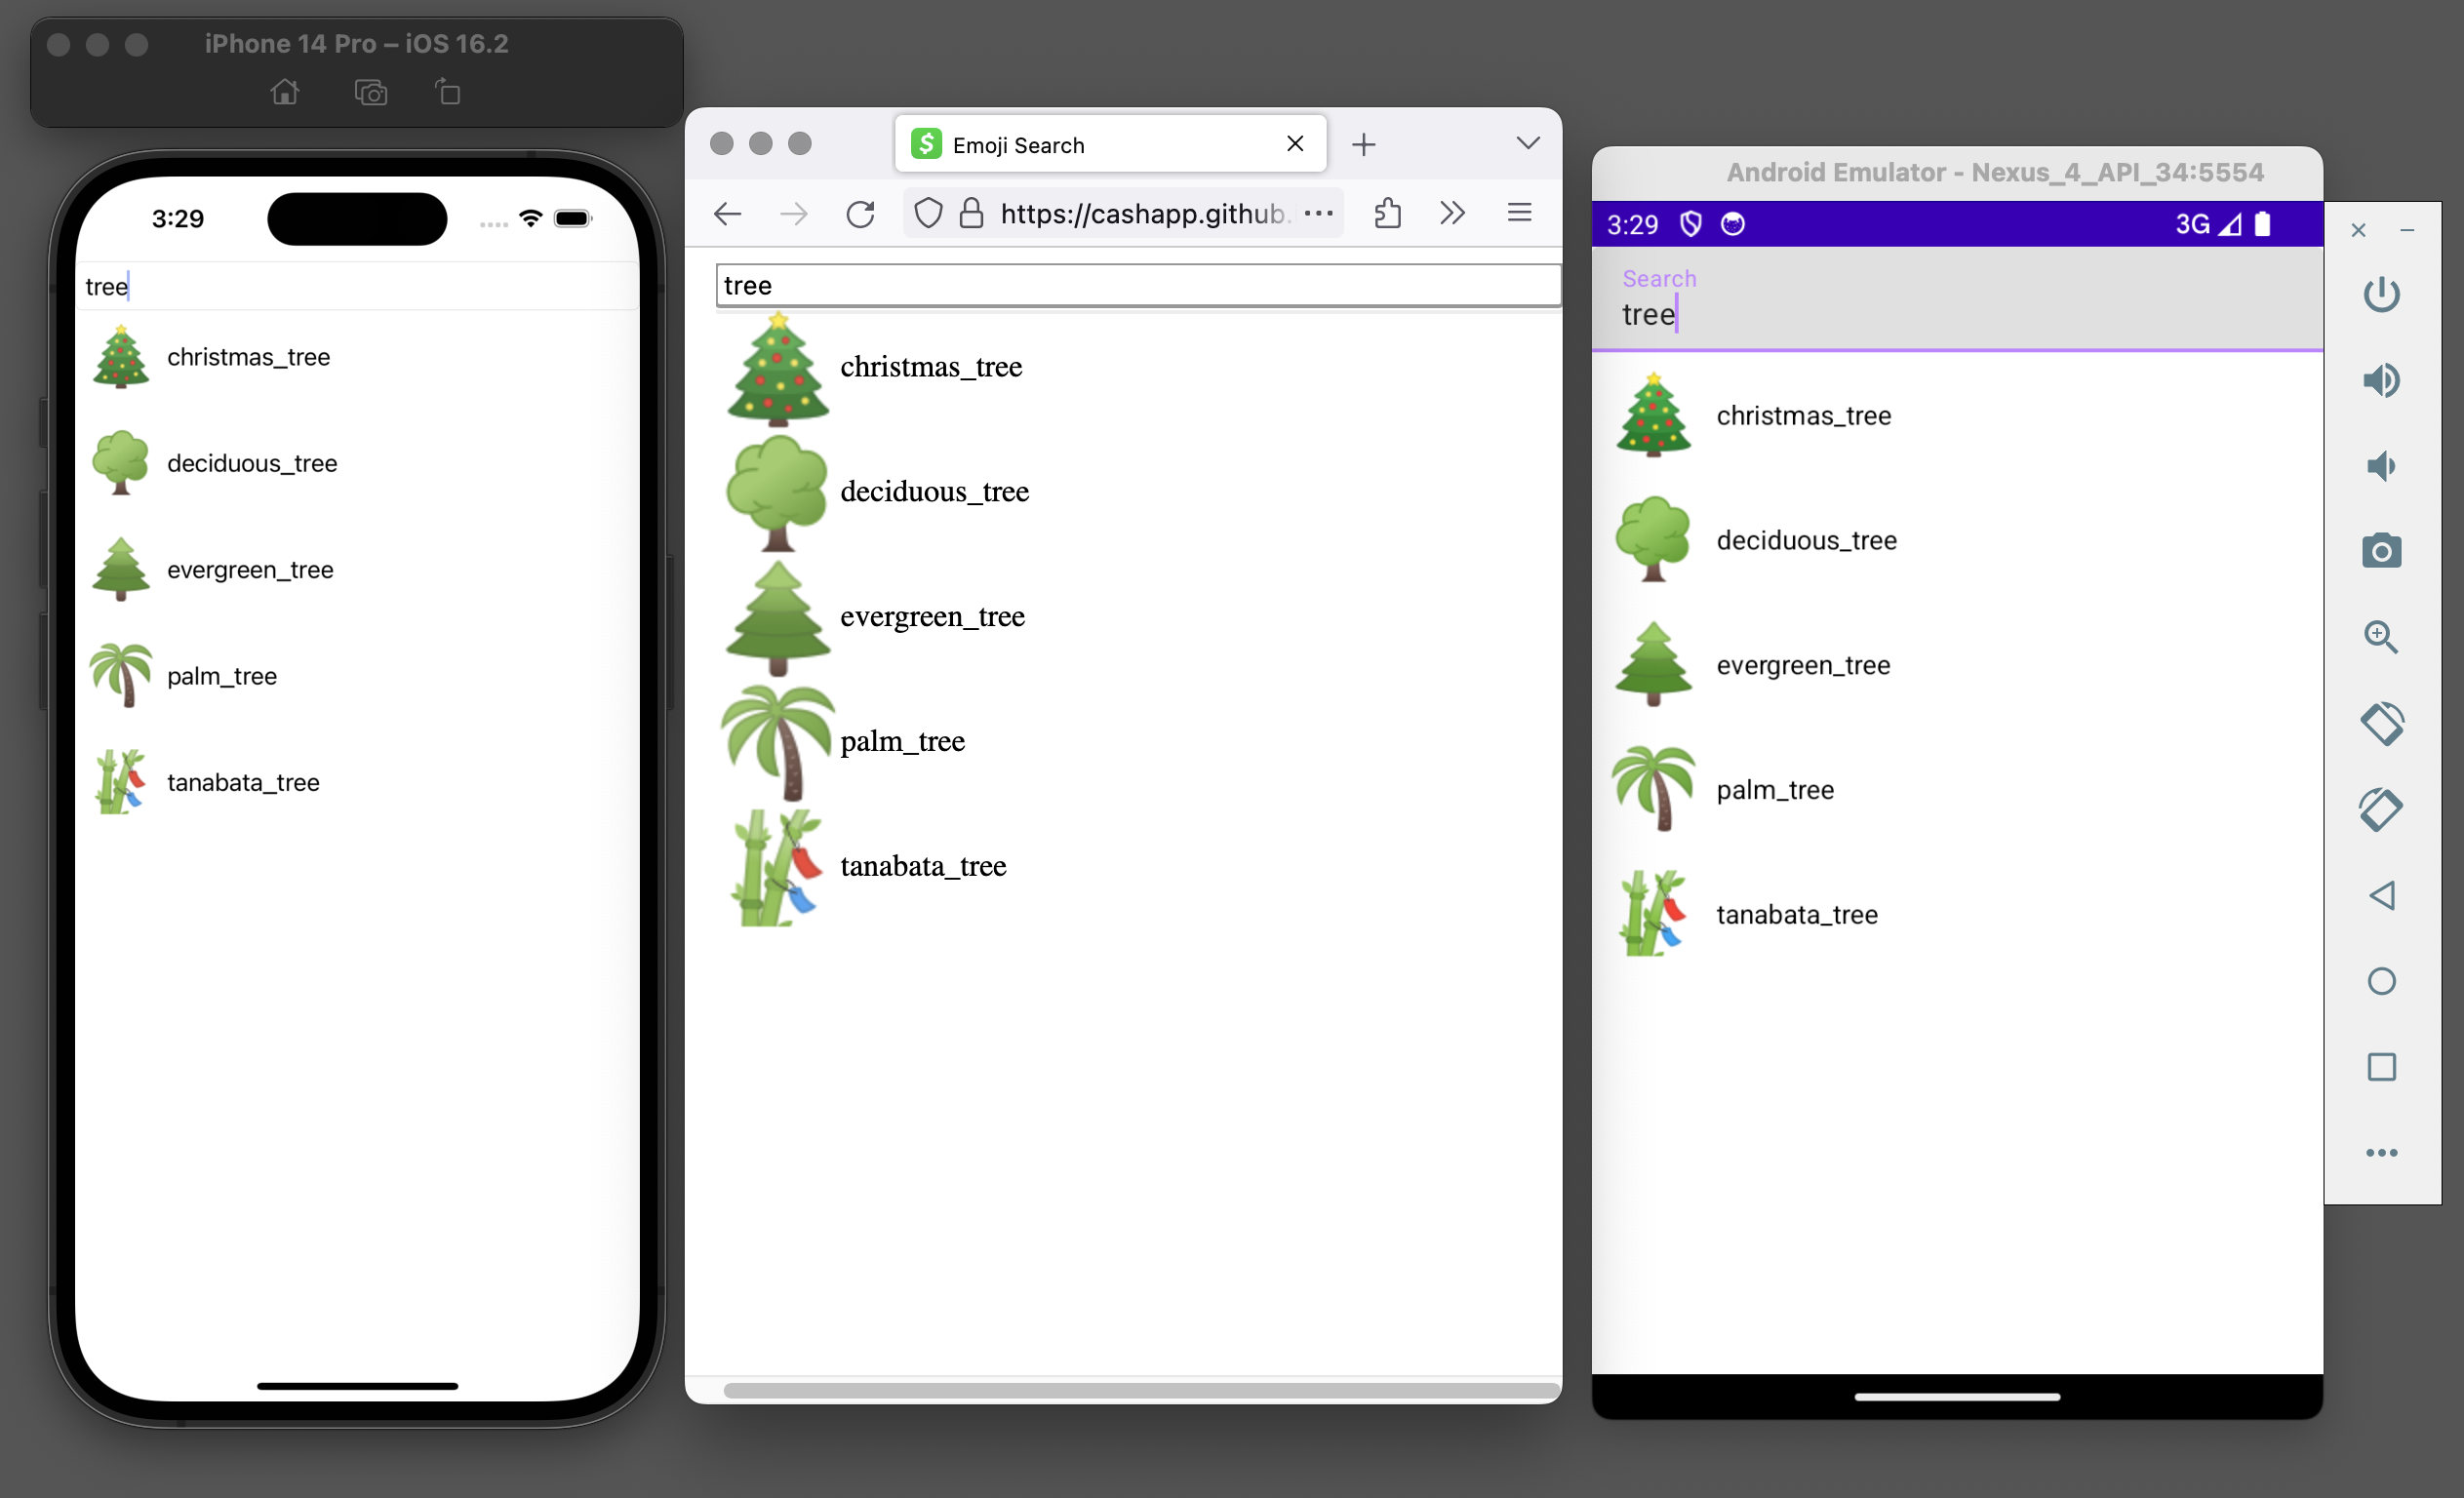 Screenshot showing the iOS simulator, a web browser, and the Android emulator each running a version of the same app which is an input box containing the word "tree" and below it a list of five emoji images and their names which all contain the word "tree"